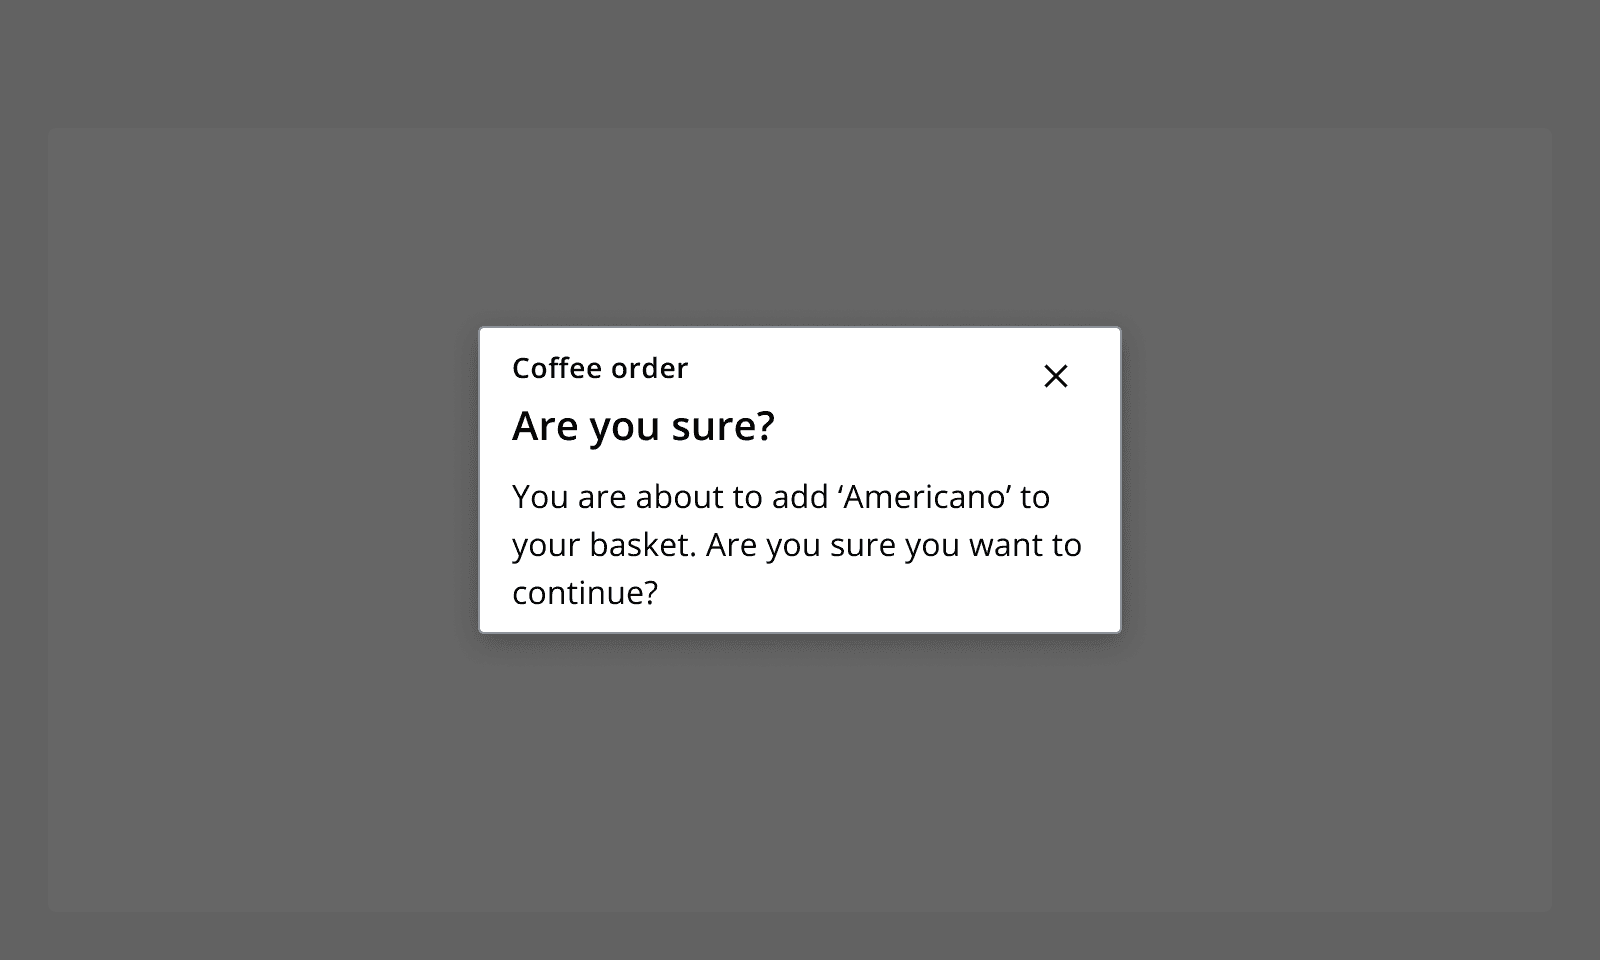 An example dialog message for a coffee order saying 'Are you sure?' with buttons for 'Continue' and 'Go back'.